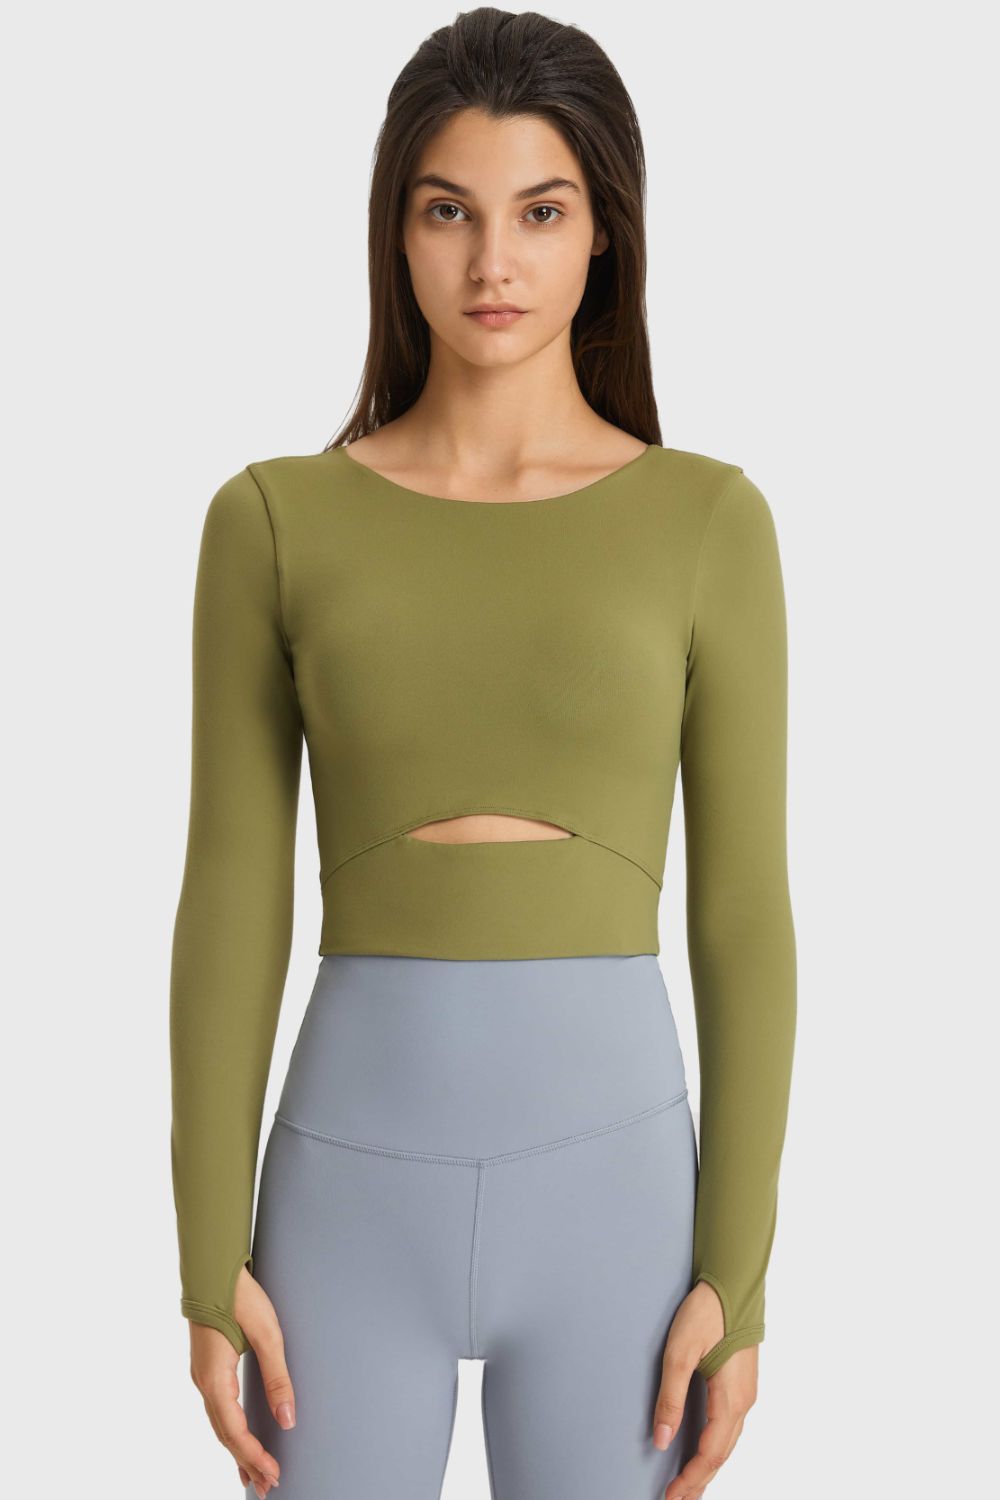 Cutout Long Sleeve Cropped Sports Top - Green / 4 Apparel & Accessories Wynter 4 All Seasons